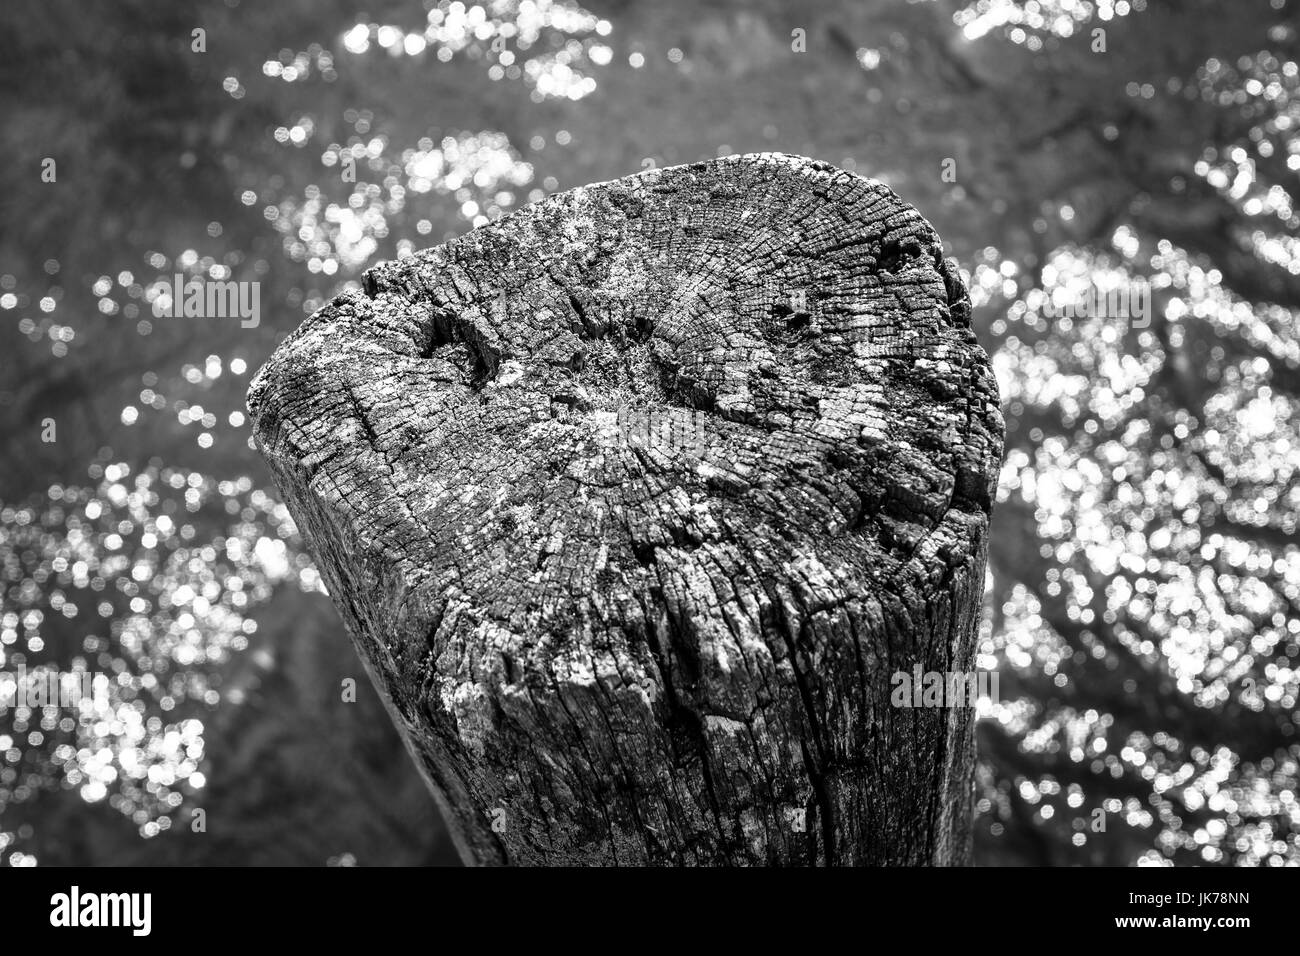 The old stump sticks out of the water. Background. Black and white. Stock Photo